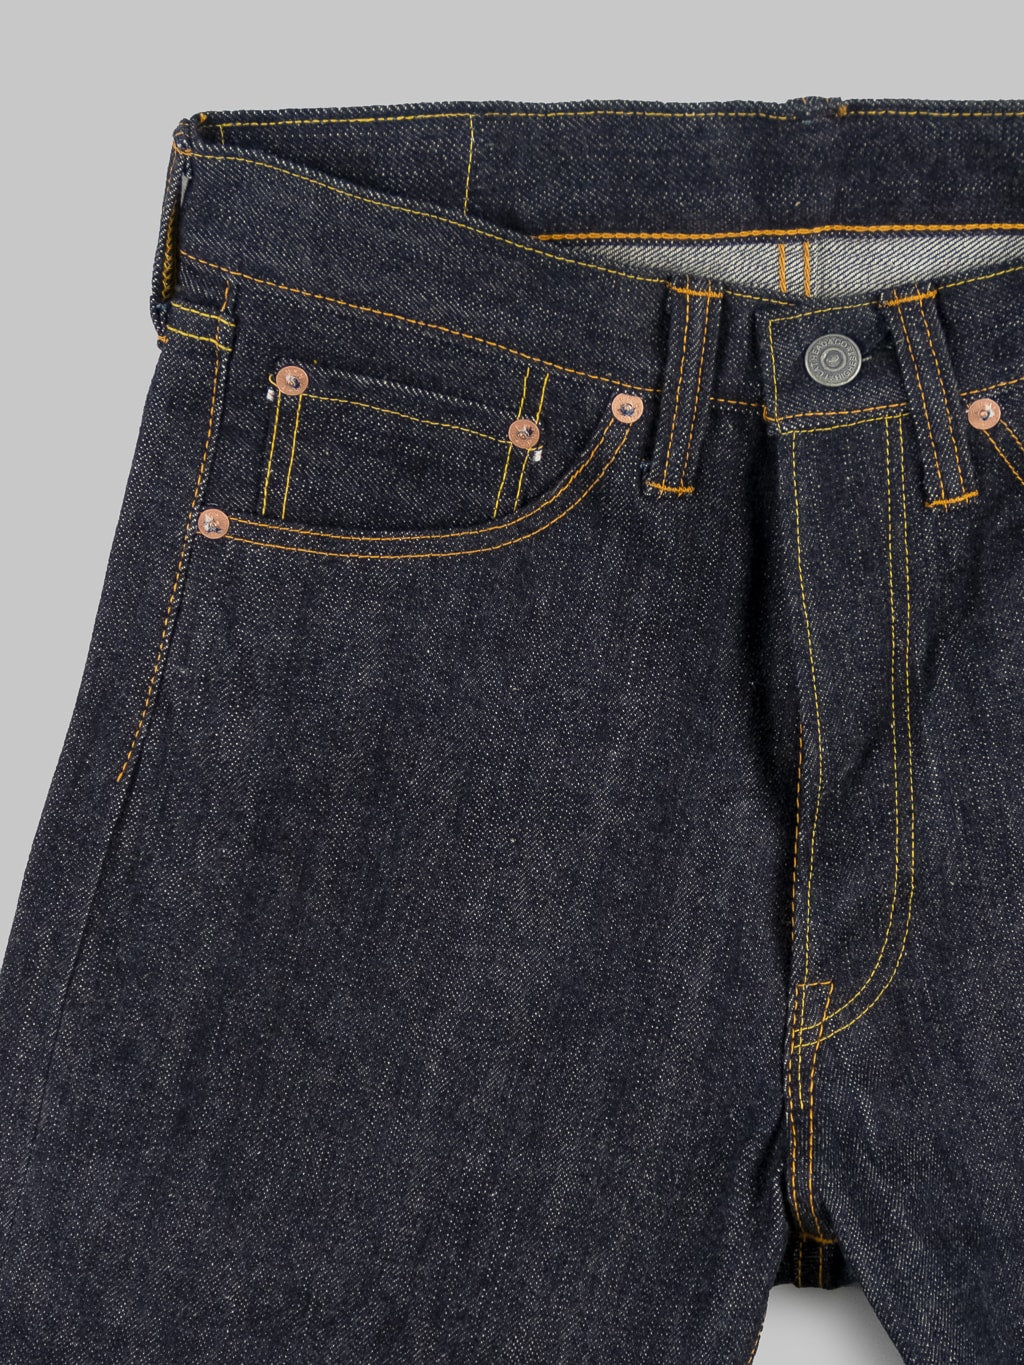 The Flat Head 3004 Regular Straight Jeans front details